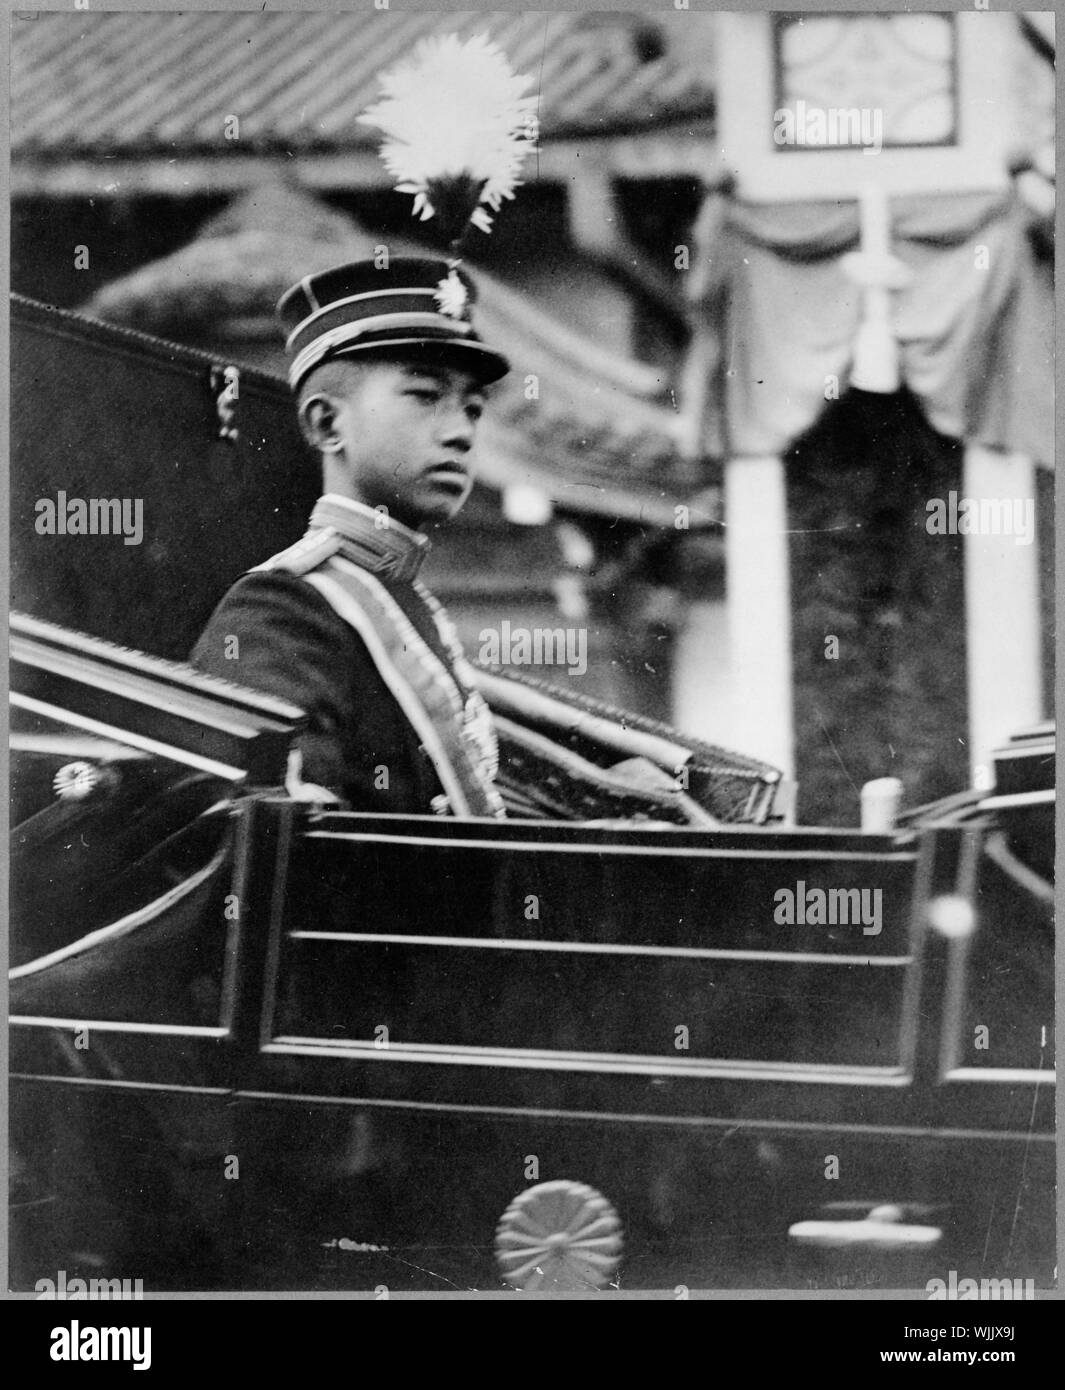 Hirohito, Emperor of Japan, half-length portrait, facing right, seated in carriage with chrysanthemum emblem on the door Stock Photo